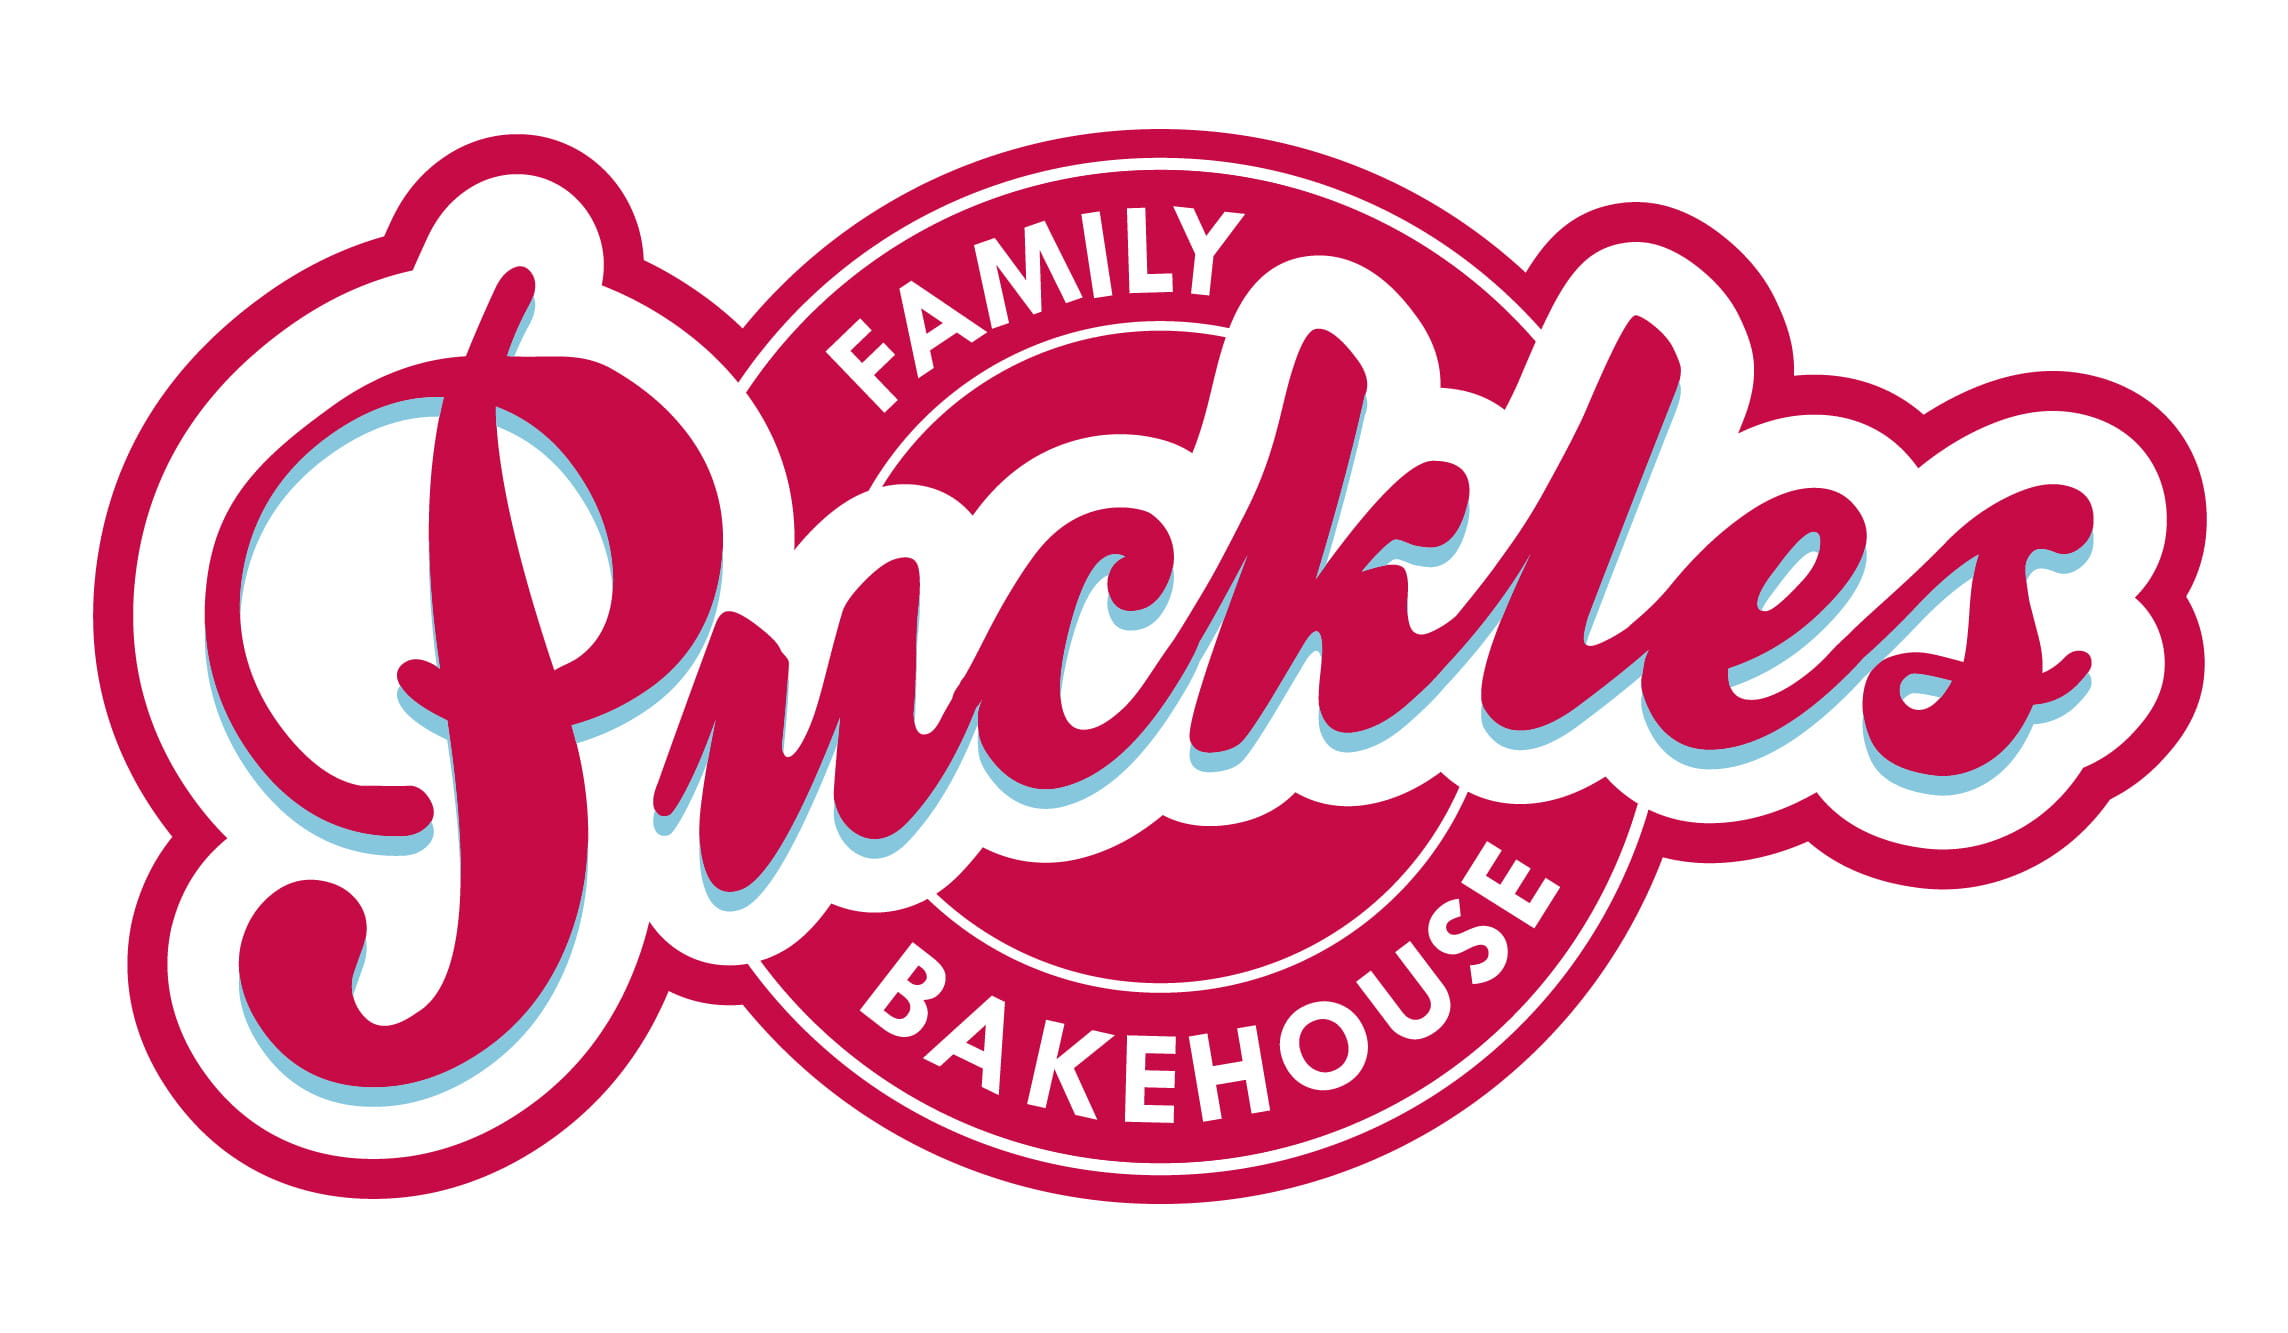 Puckles Family Bakehouse